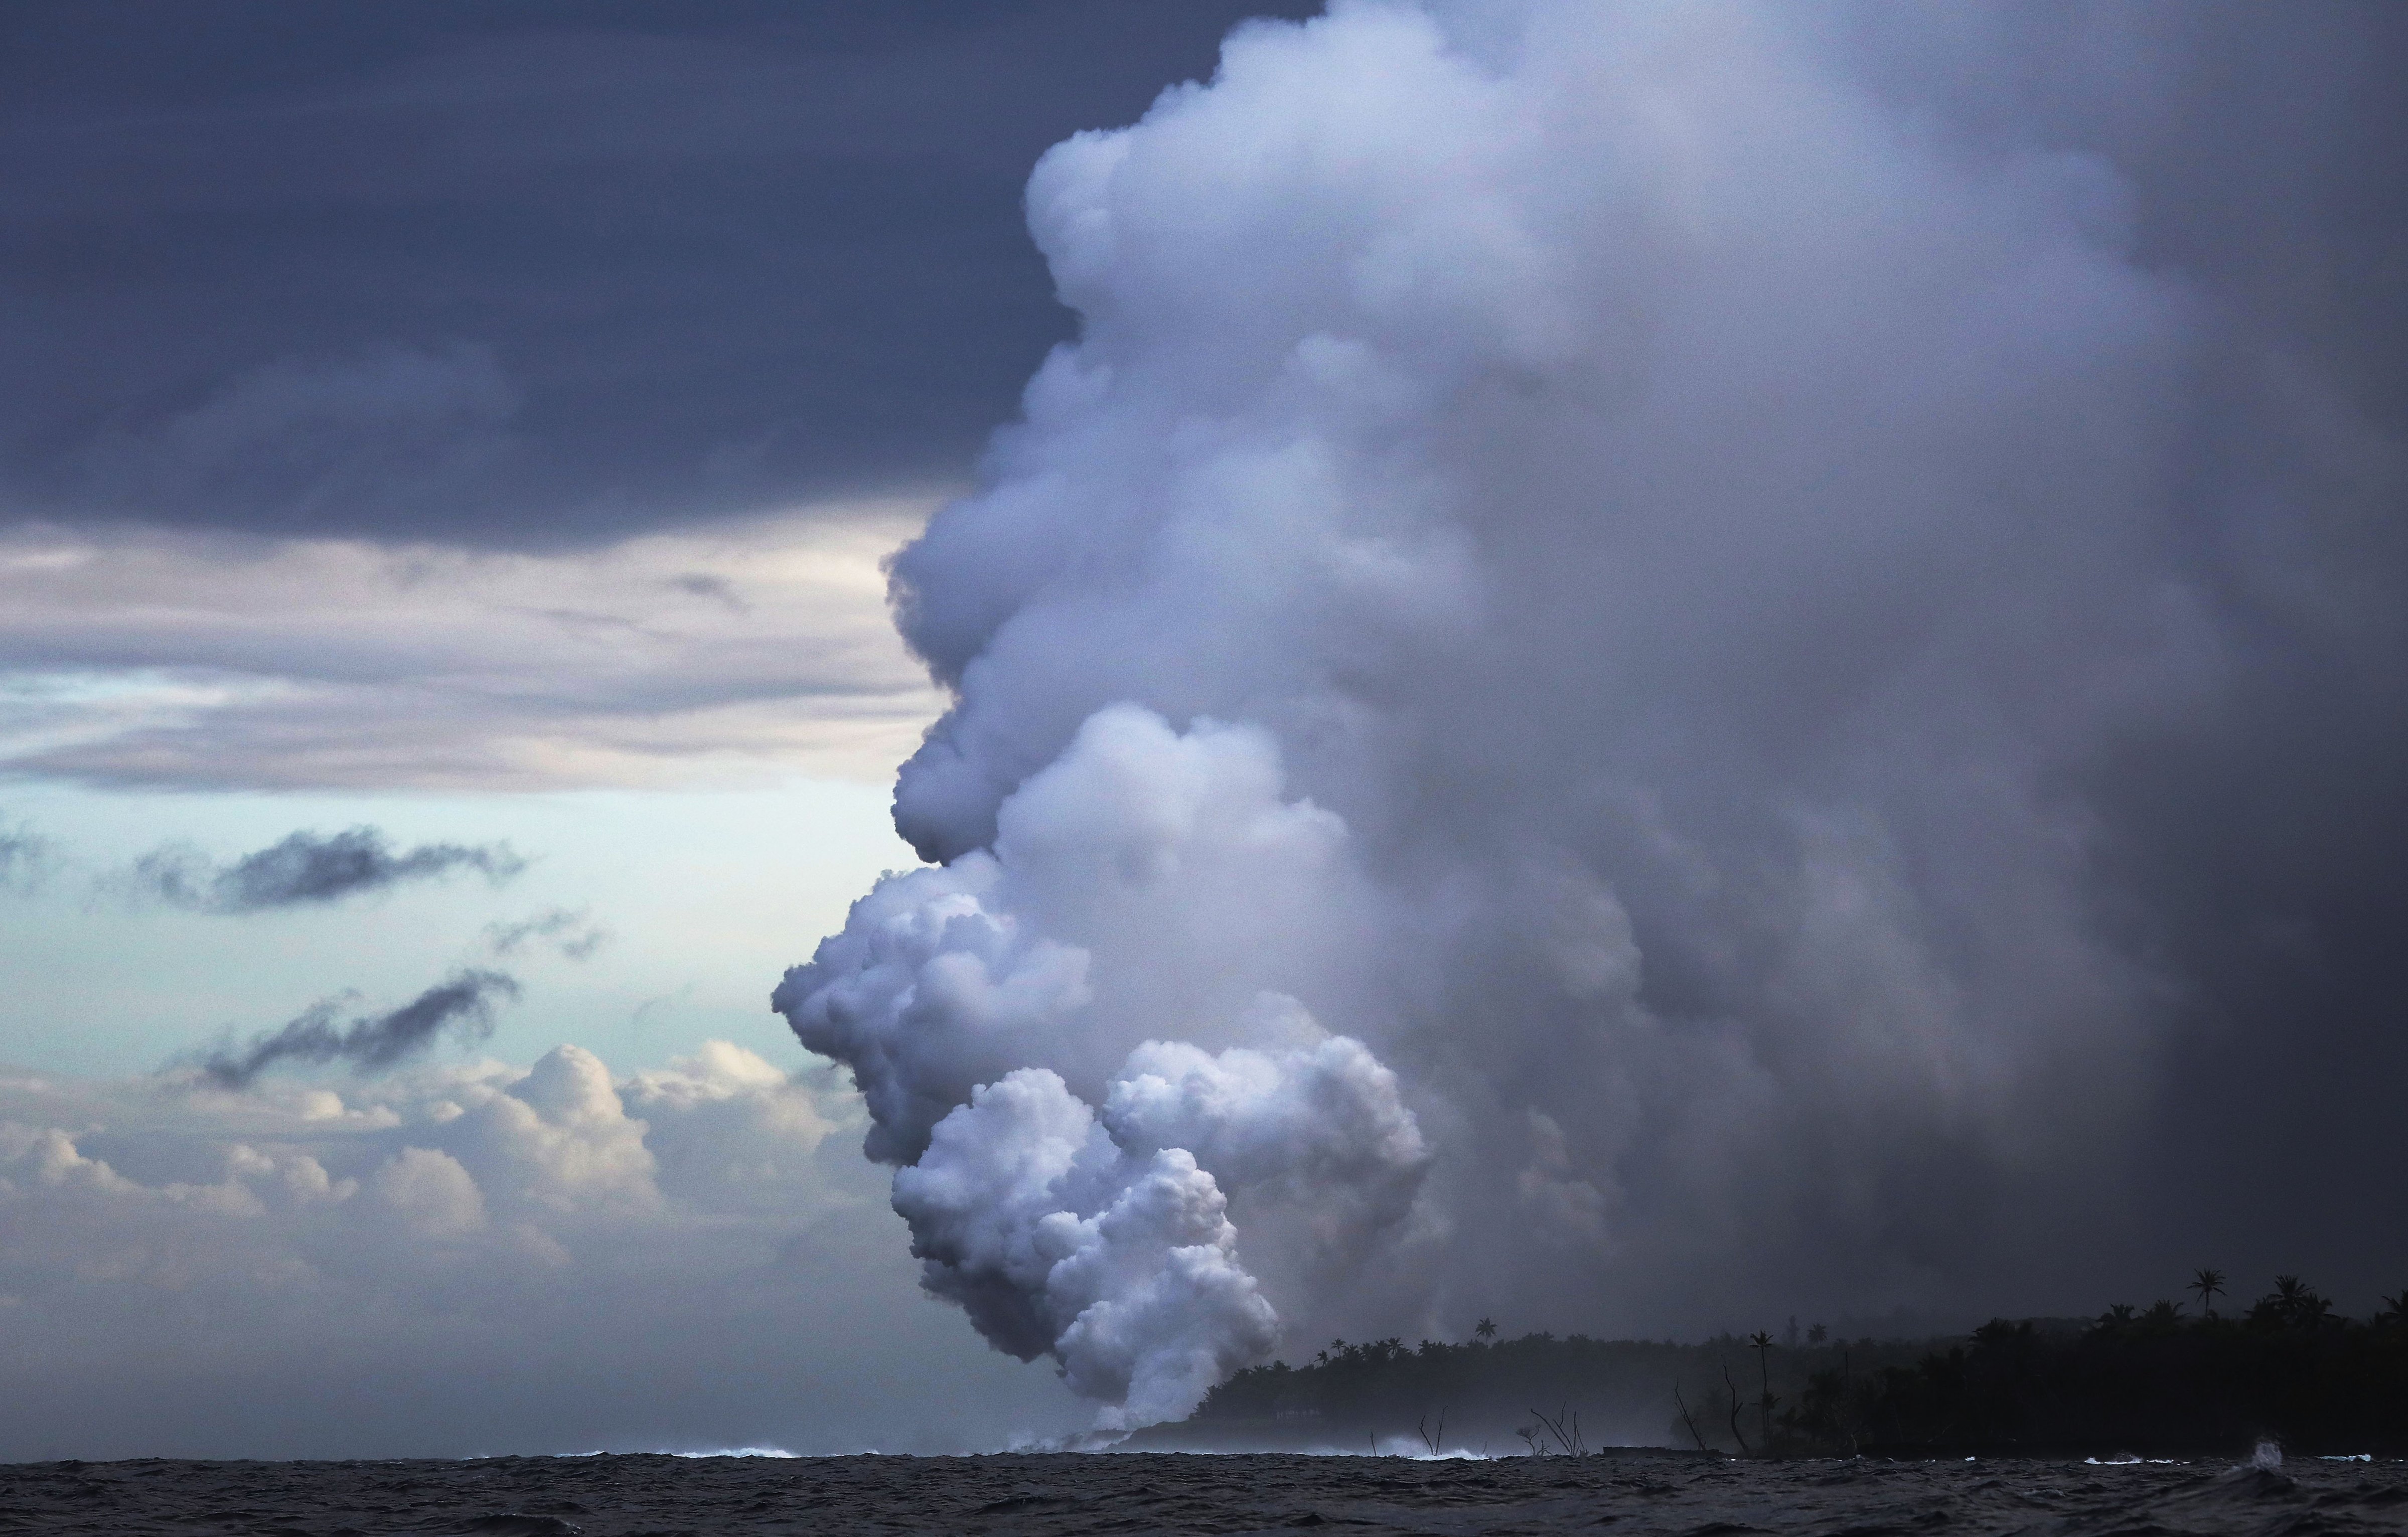 A steam plume rises from lava entering the Pacific Ocean, after flowing to the water from a Kilauea volcano fissure, on Hawaii's Big Island on May 20, 2018 near Pahoa, Hawaii. (Mario Tama—Getty Images)